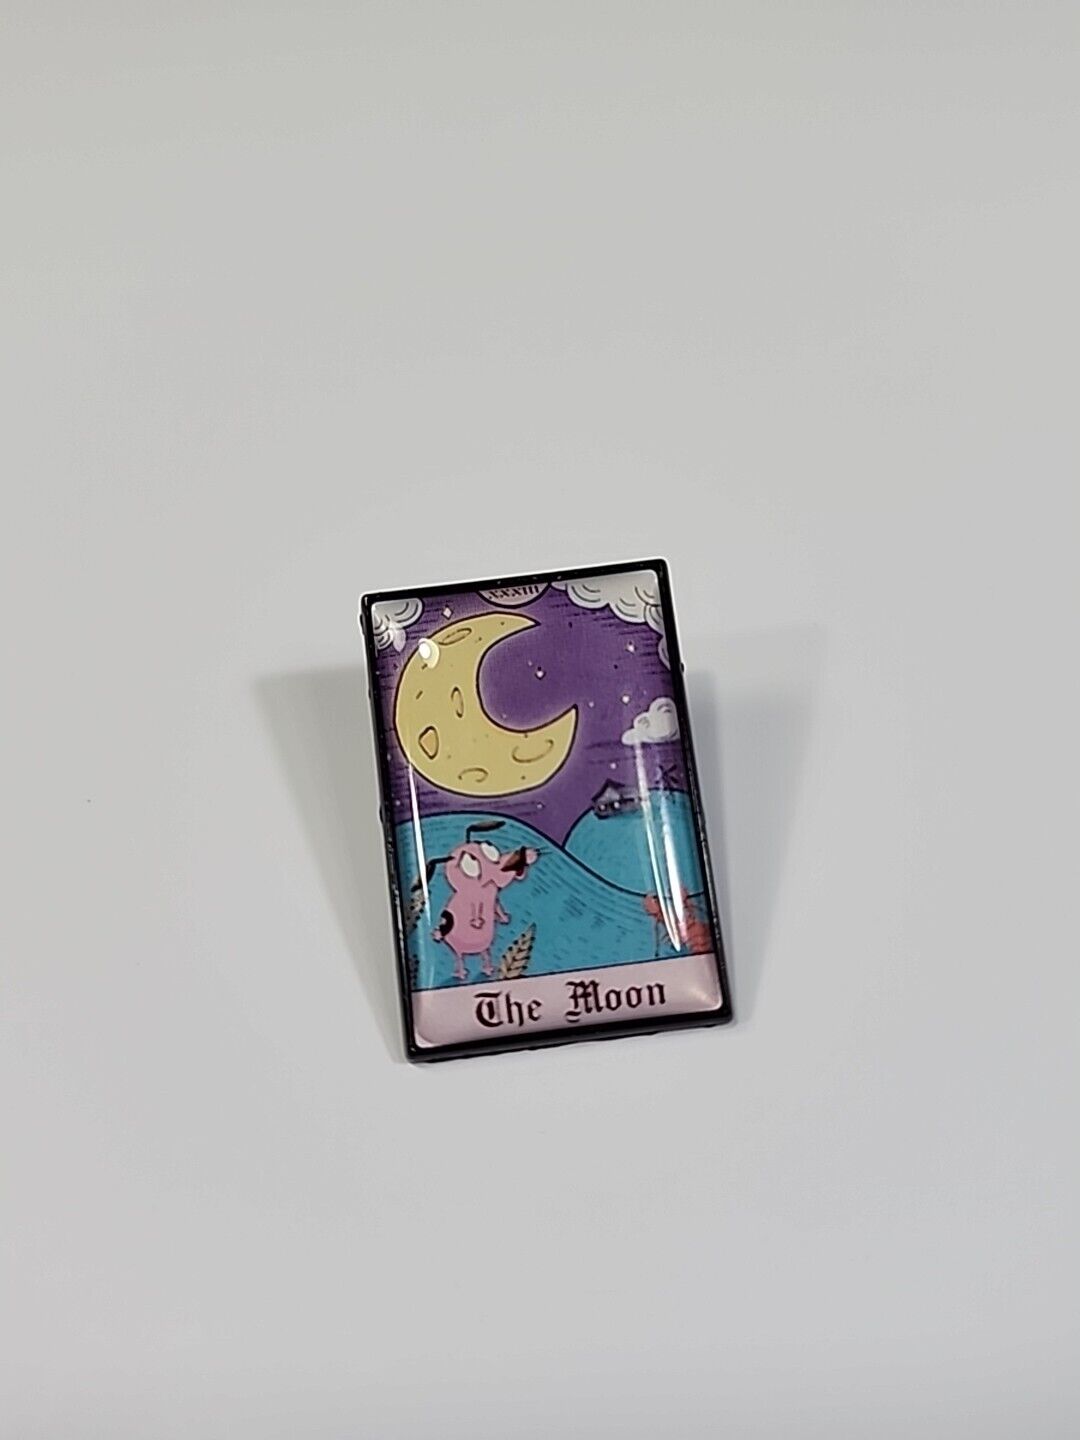 The Moon Tarot Card Lapel Pin Courage the Cowardly Dog Humorous